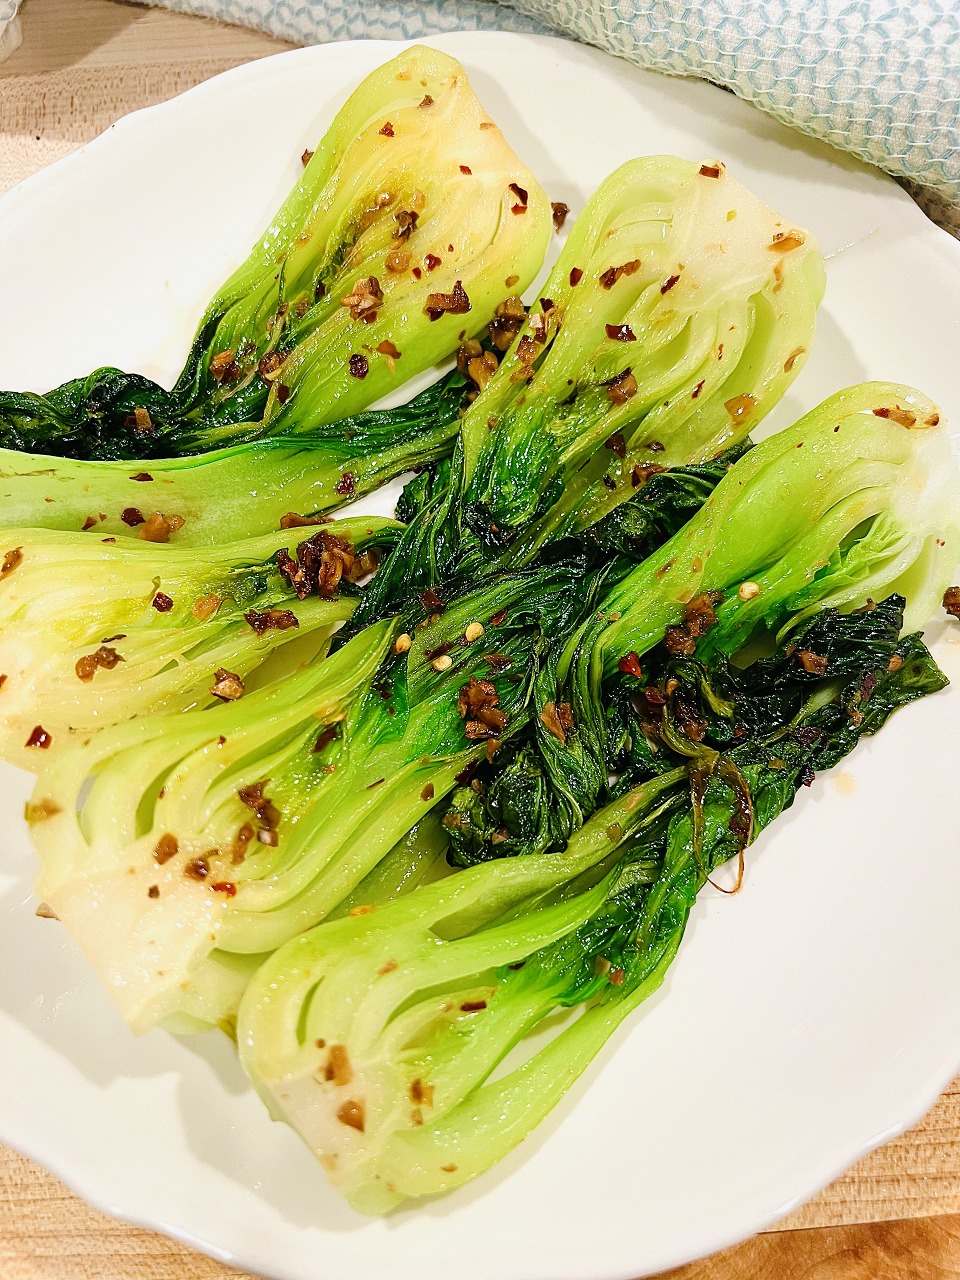 Shanghai Bok Choy with Red Pepper Flakes